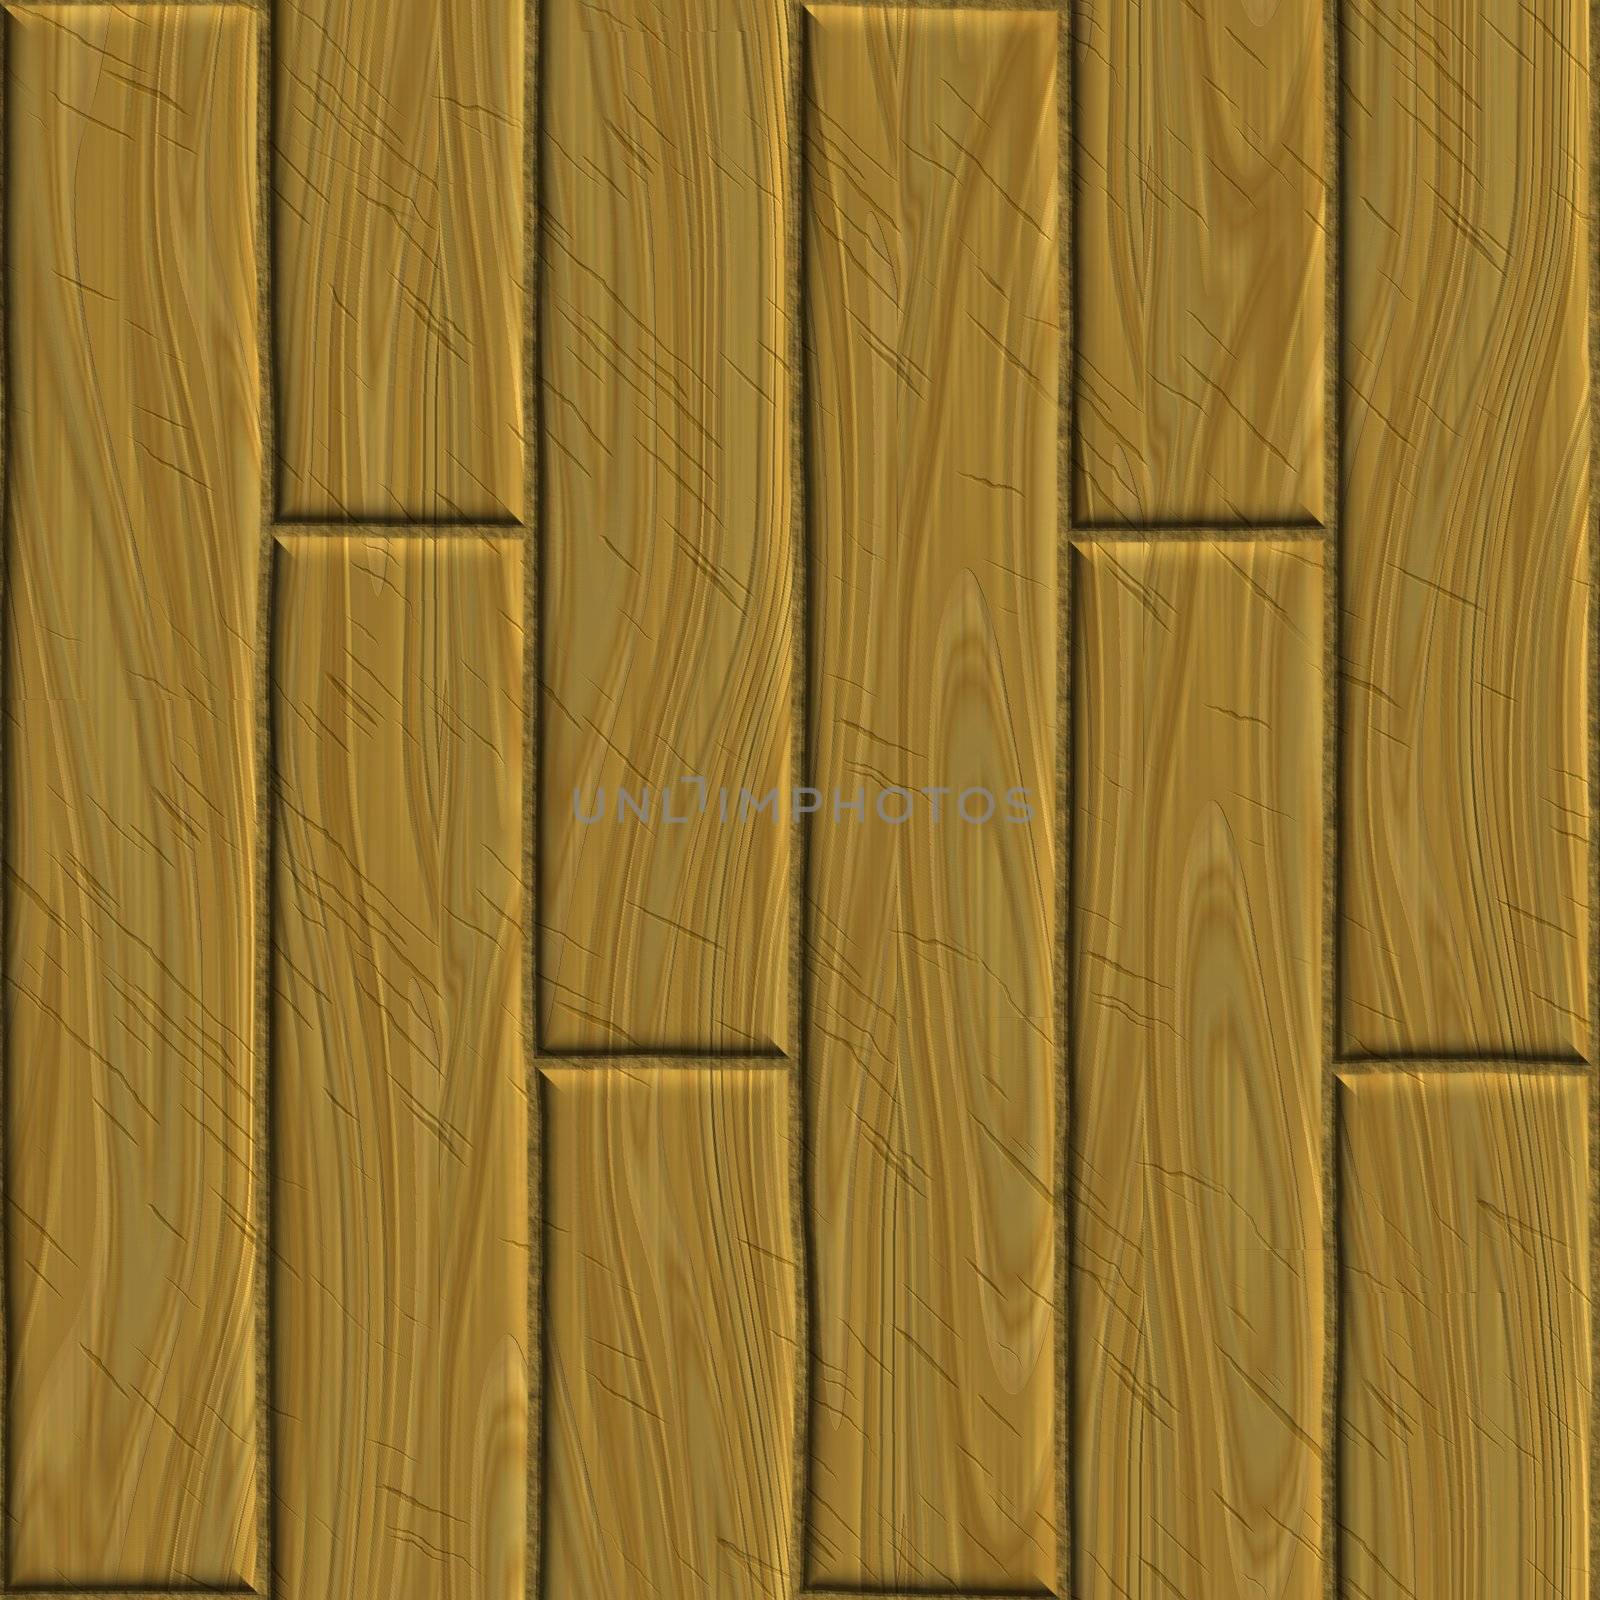 The wooden boards, the texture